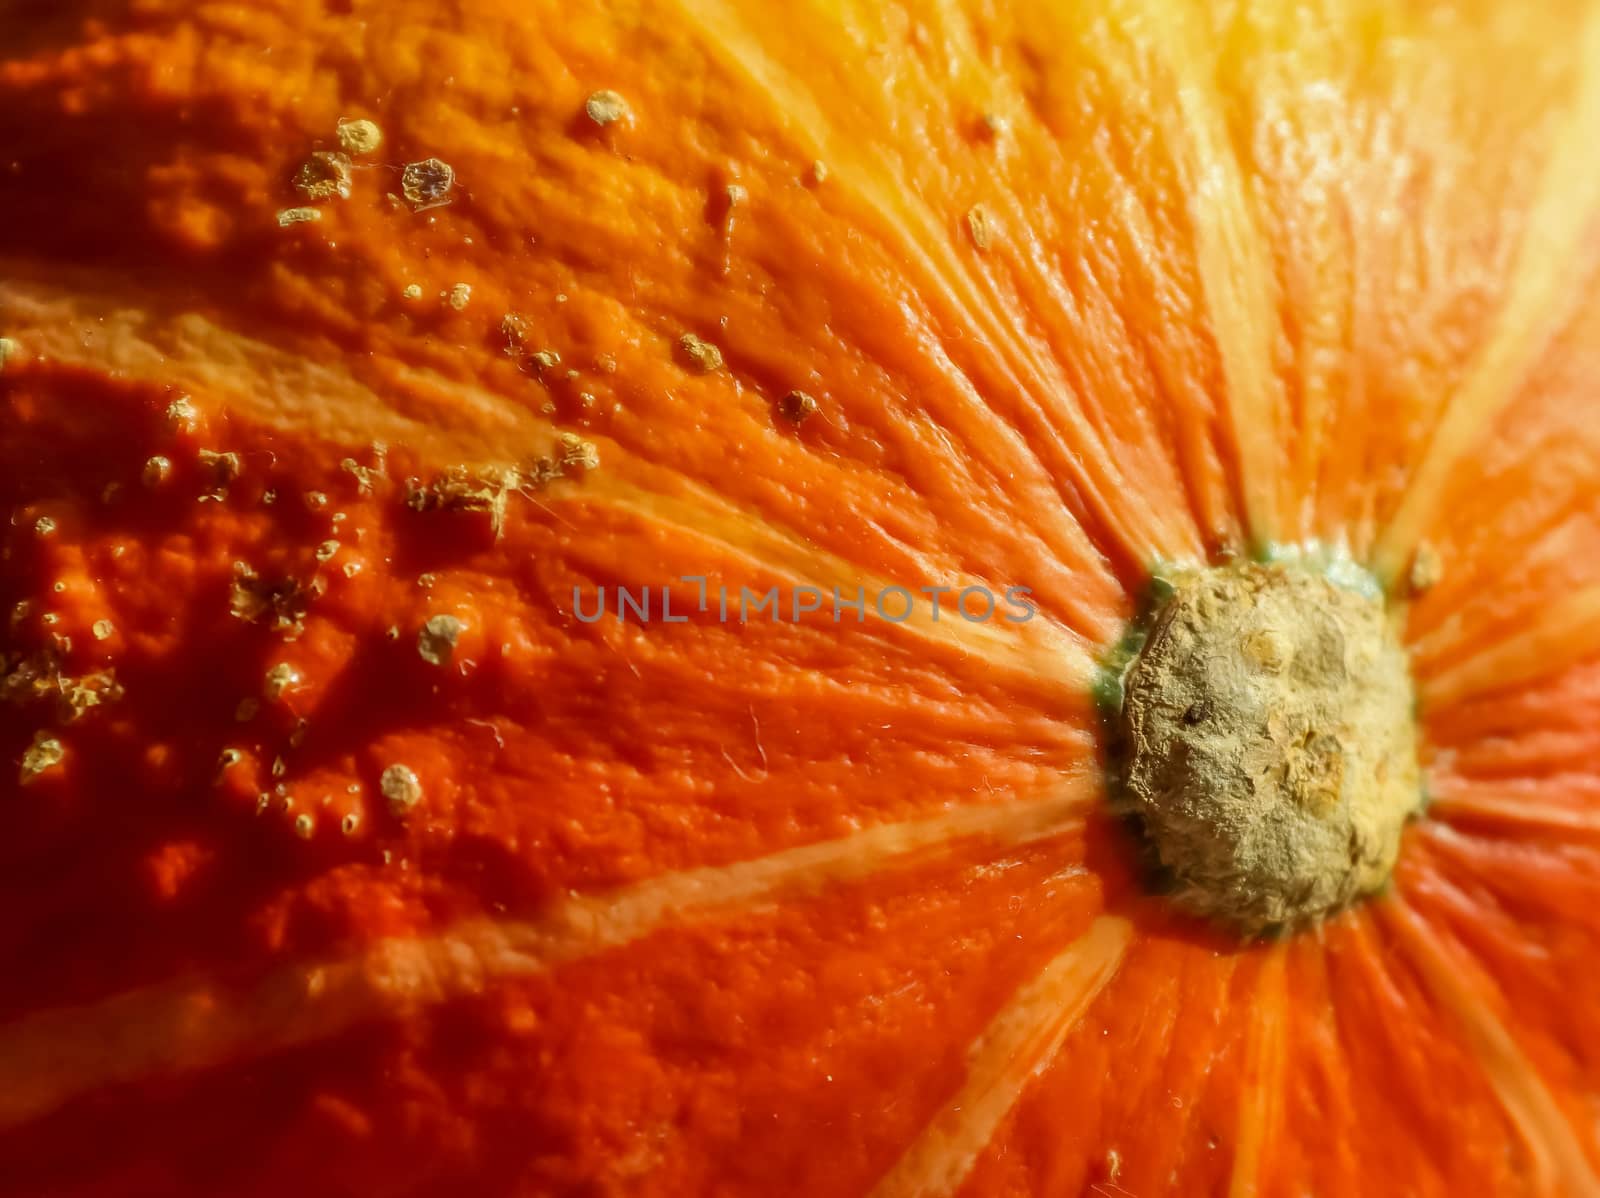 Beautiful orange pumpkin on a wooden background during helloween by MP_foto71